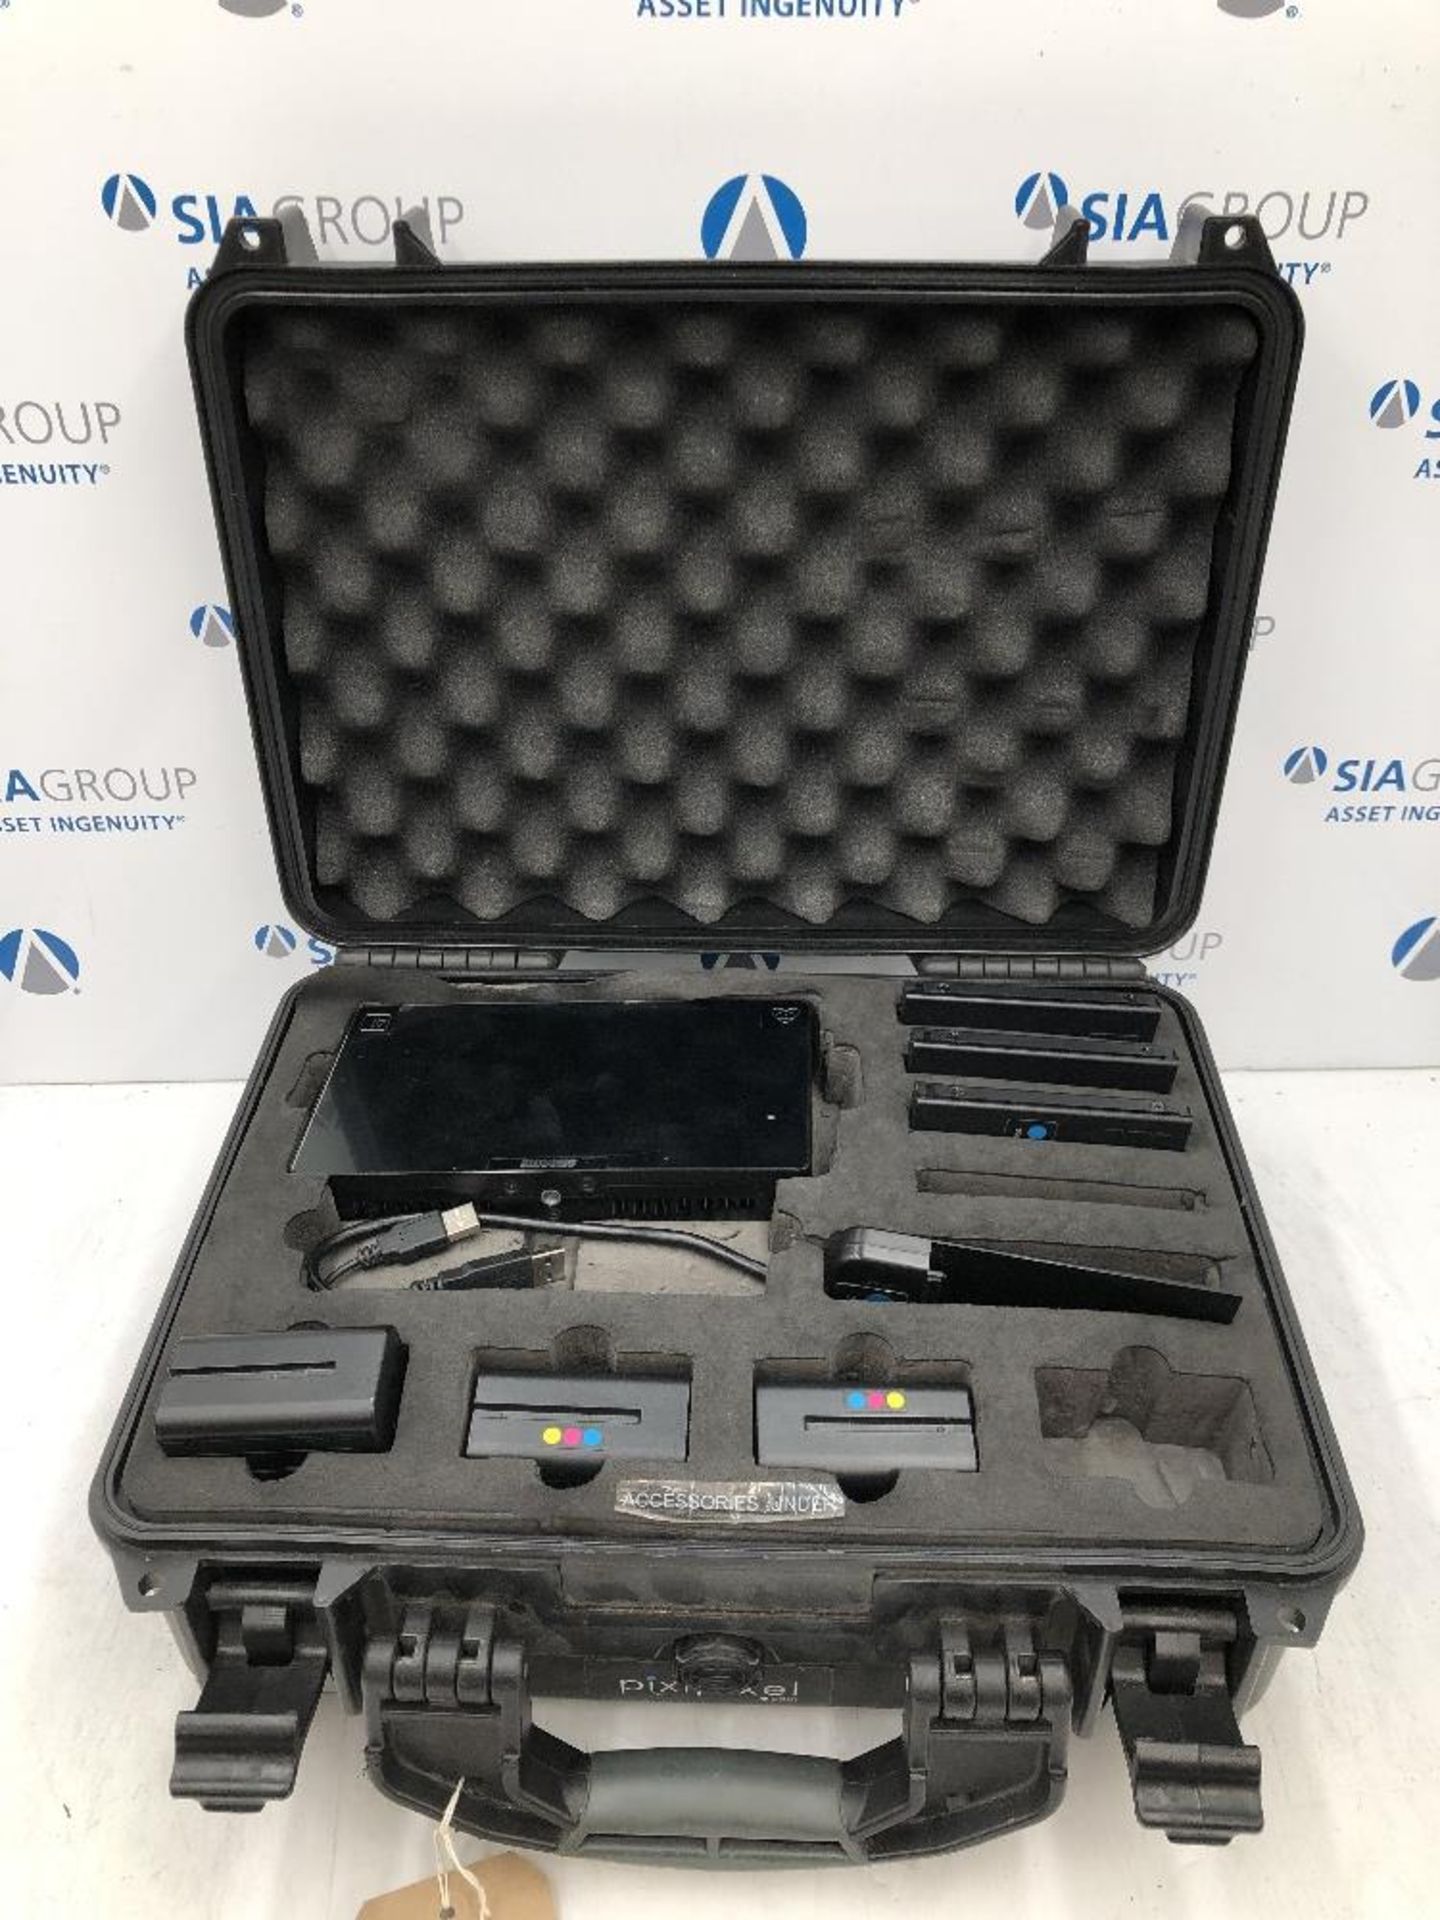 7" Atomos Shogun Recorder Unit Kit With Accessories And Carry Case